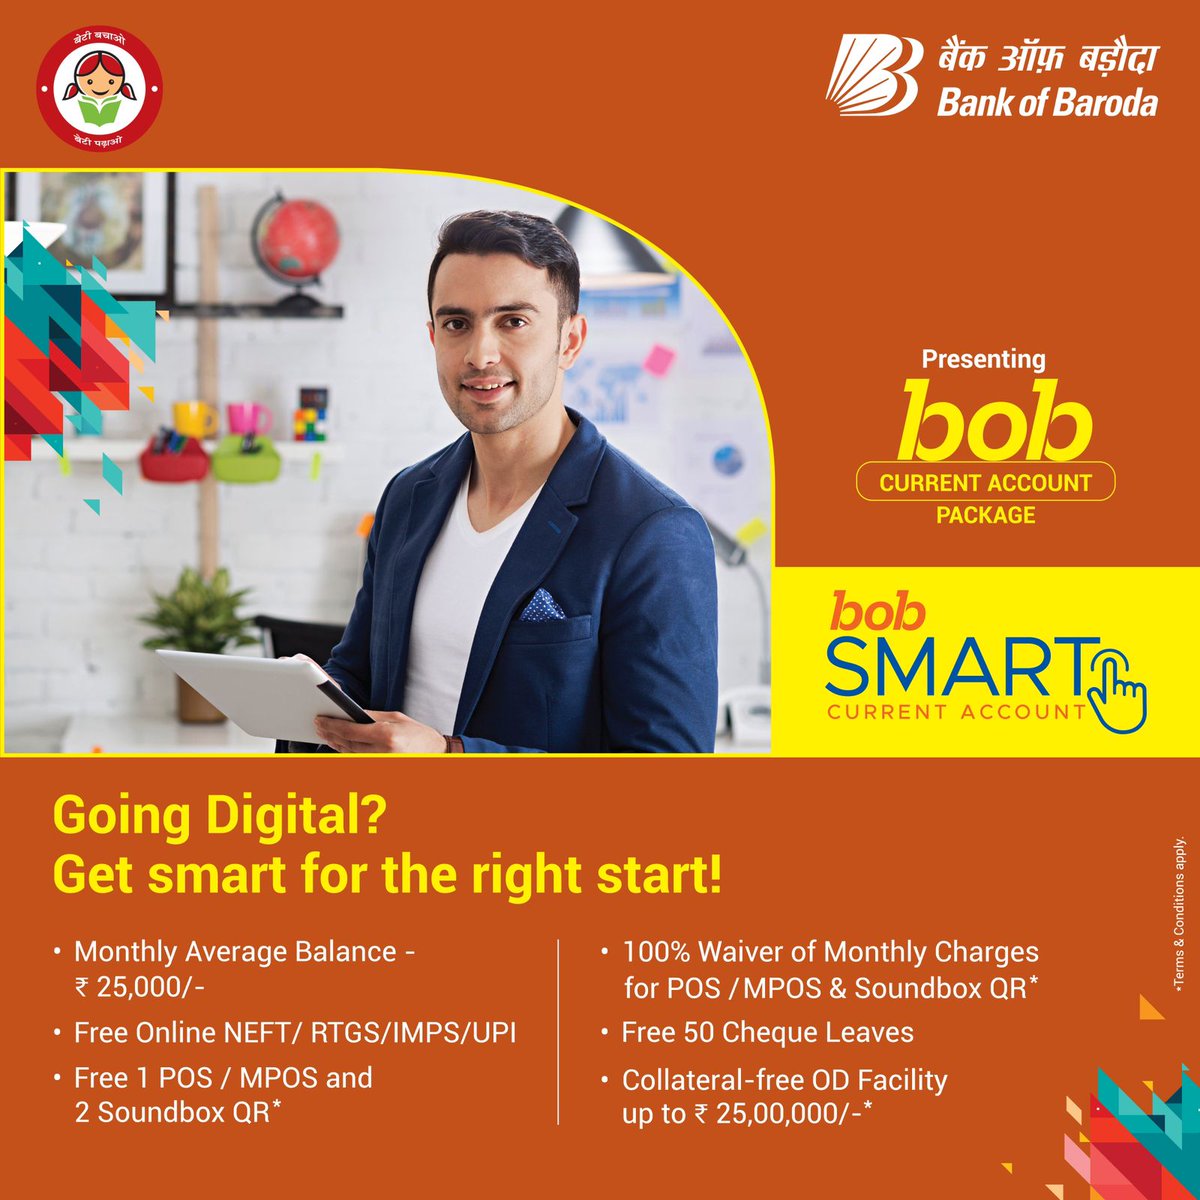 Level up your banking game with Bank of Baroda's Smart Current Account – where smart meets savvy! Know more here: bankofbaroda.in/personal-banki… #bobSmartAccount #Digital #Current Account #BankingBrilliance #SmartCurrentSolutions #BarodaBanking #FinancialInnovation